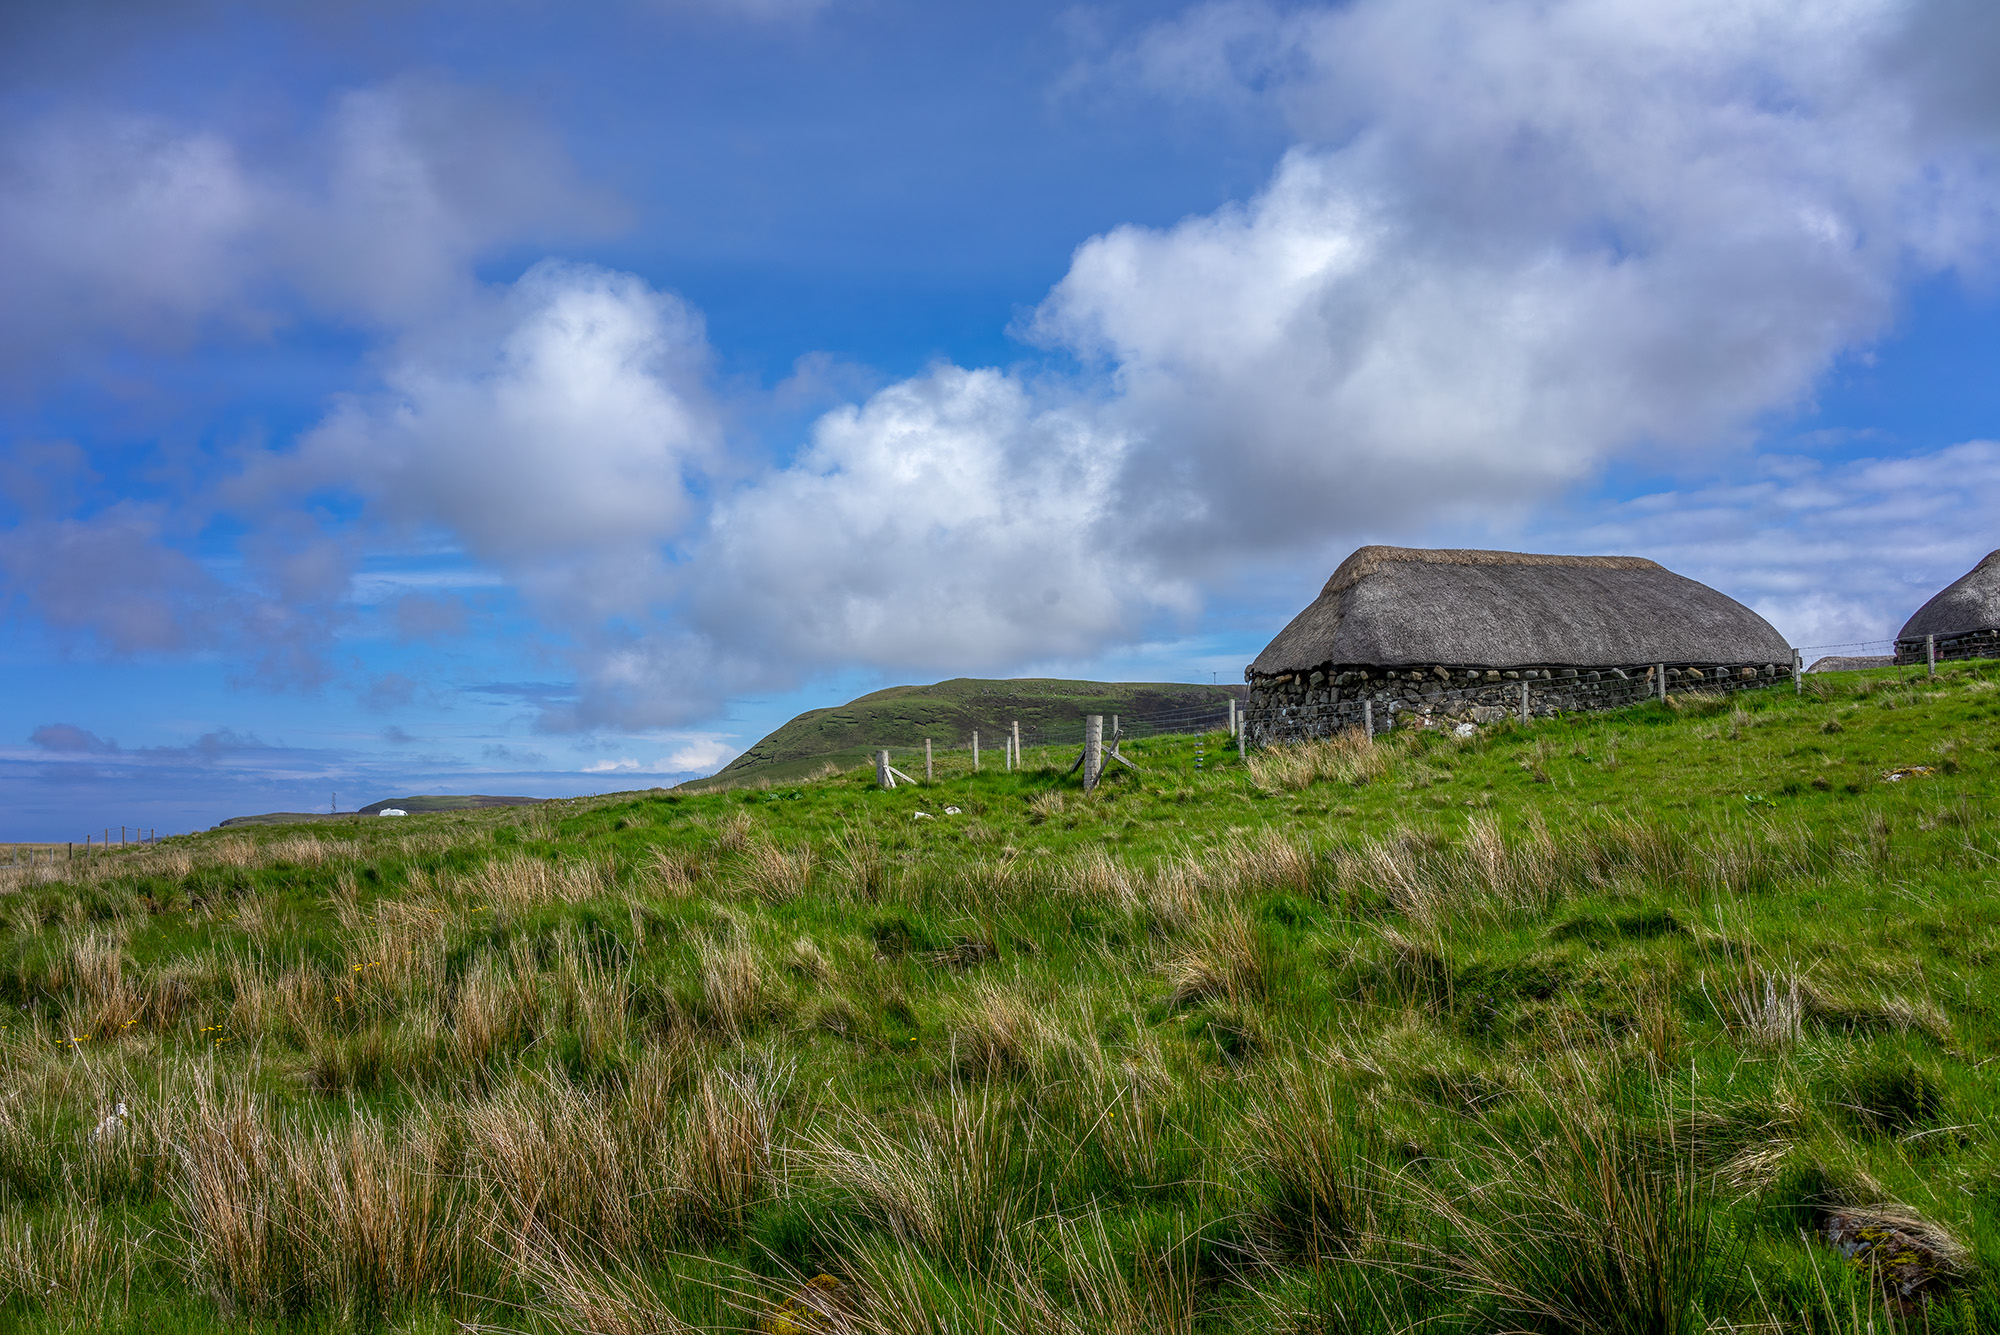 This photograph captures the essence of rural life on the Isle of Skye, Scotland. The traditional farmhouse, nestled amidst the...